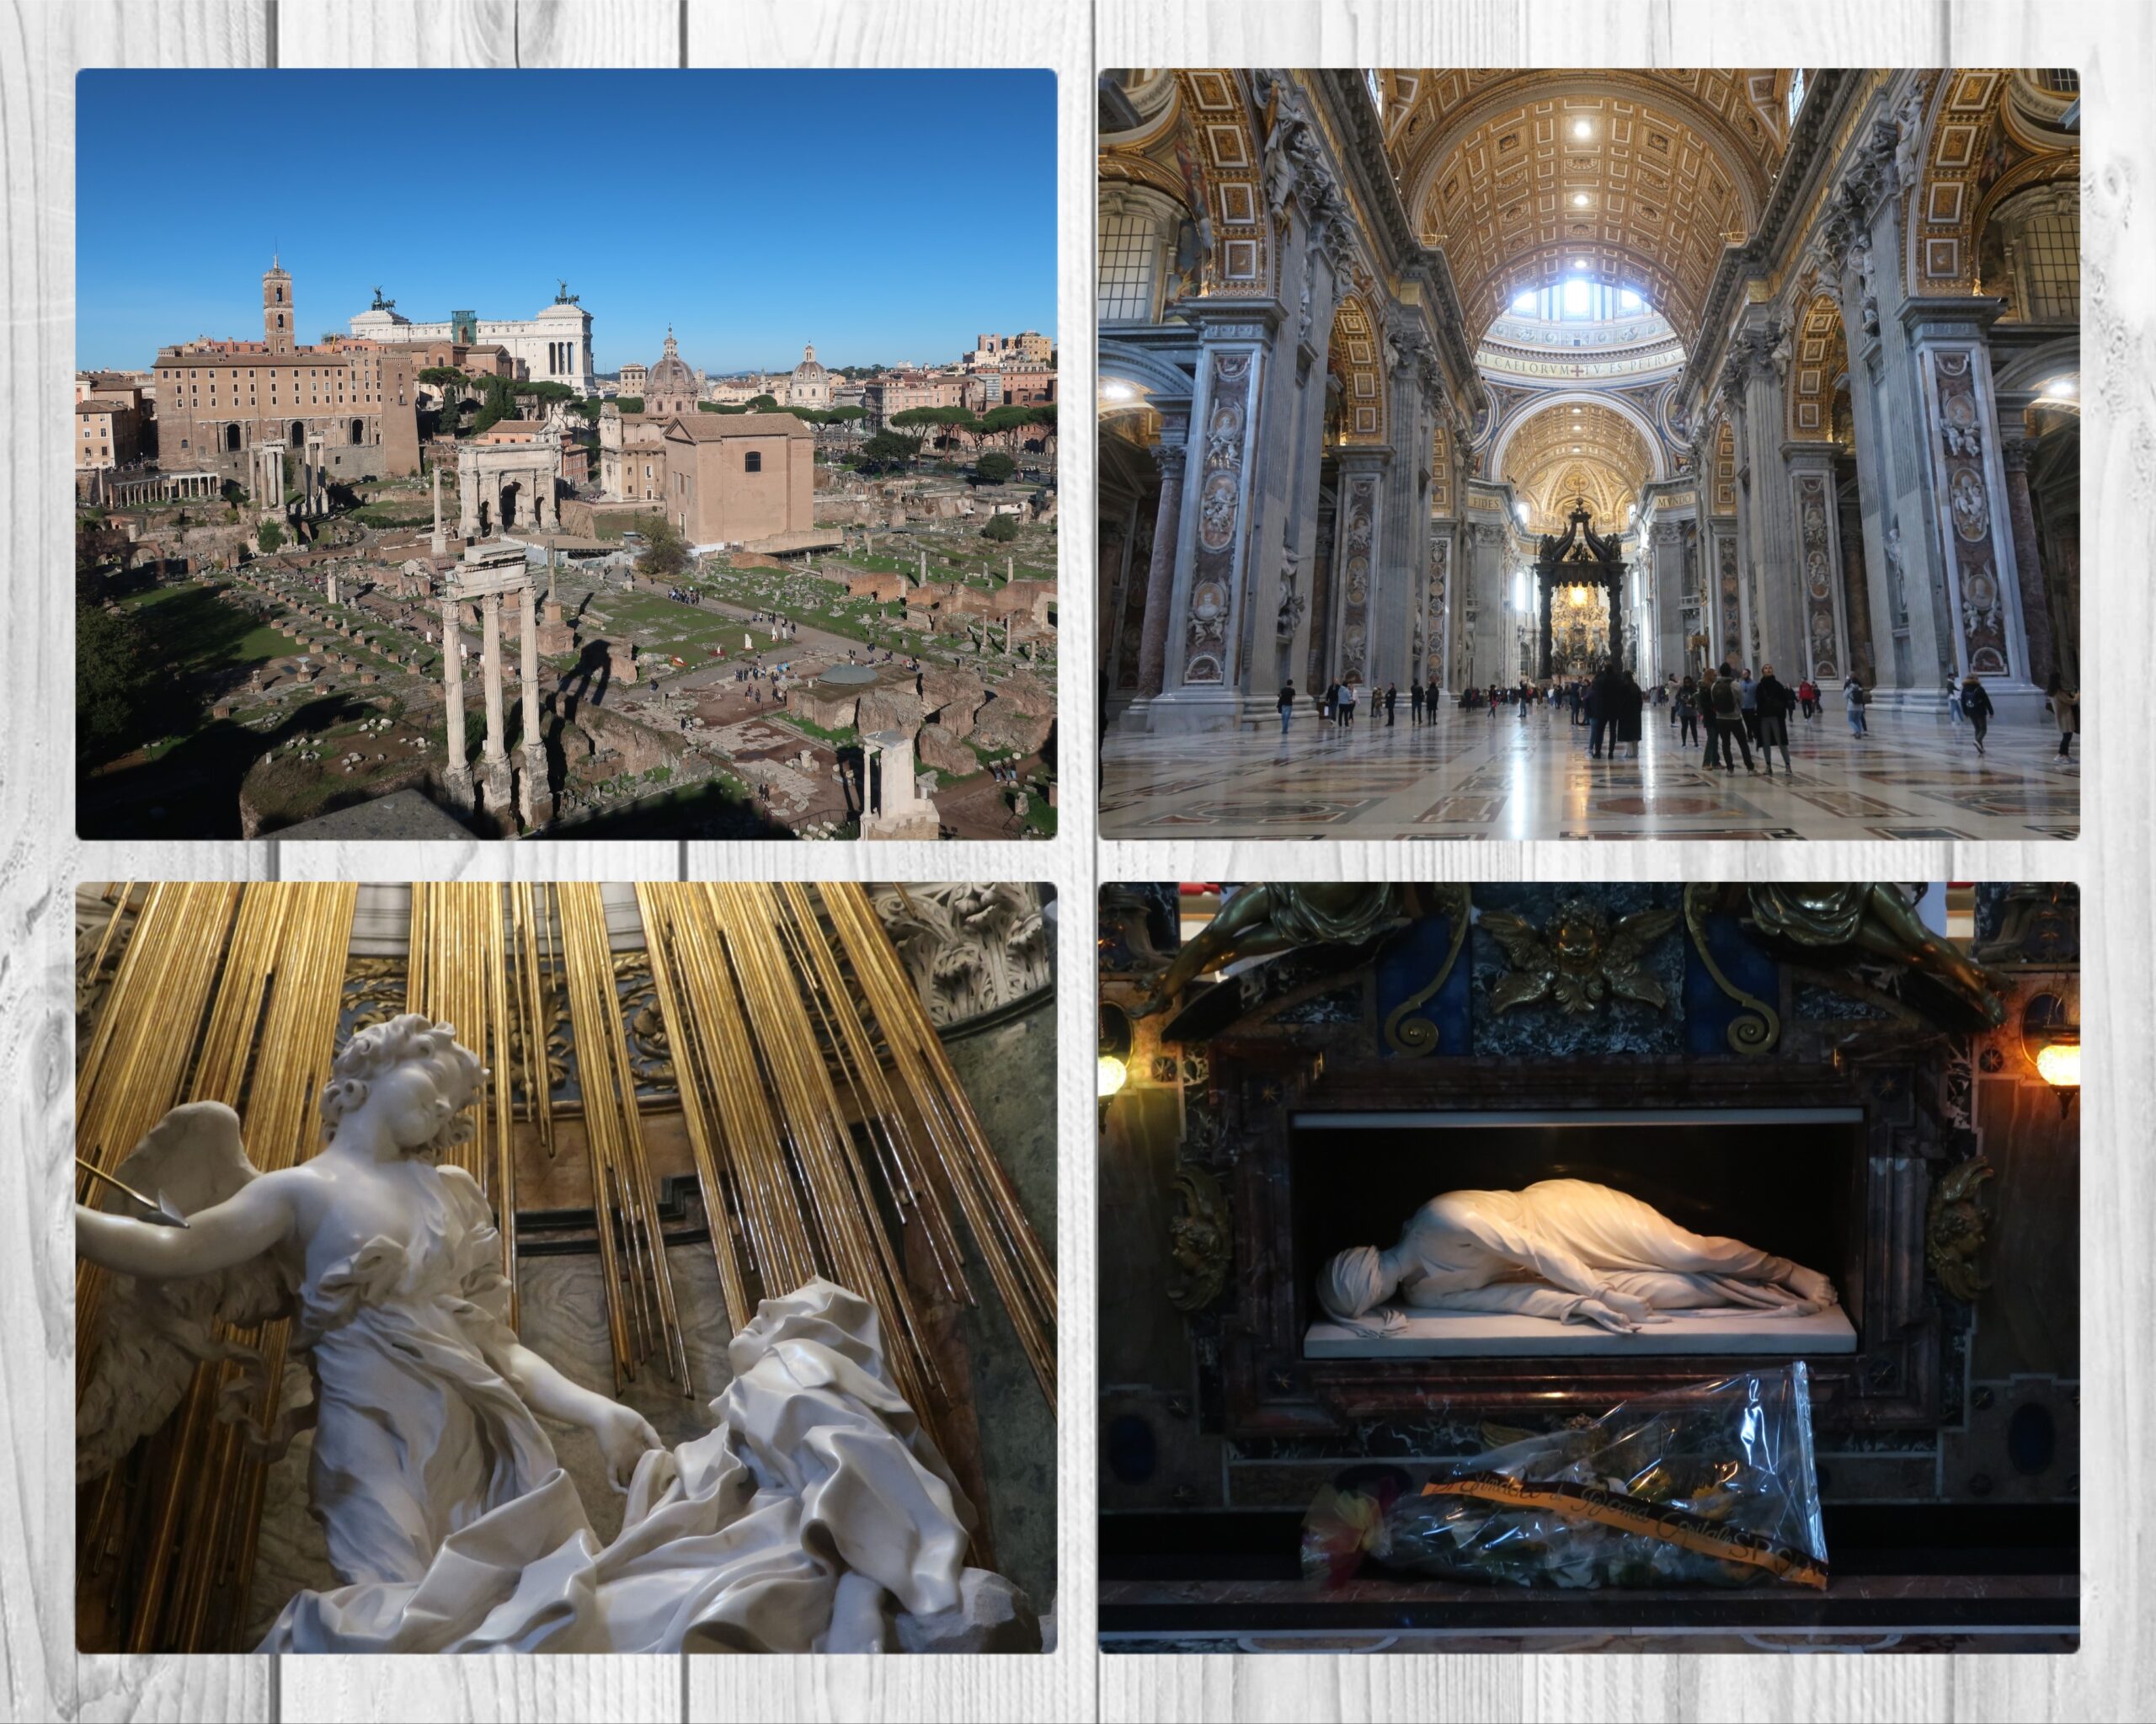 Recommended Sightseeing Spots in Rome